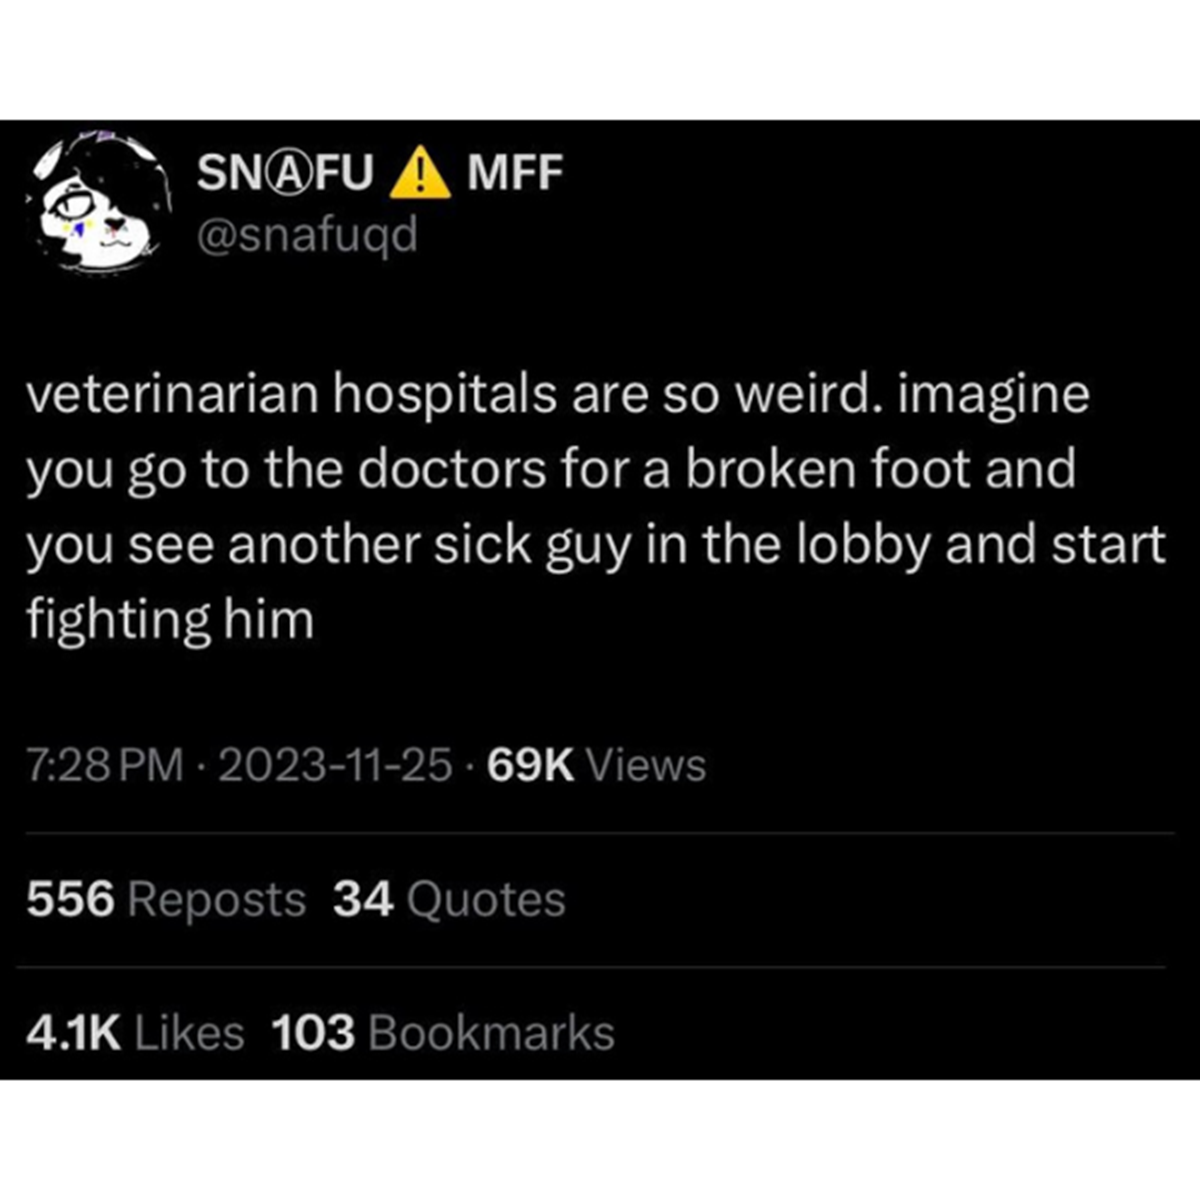 screenshot - Snafu Amff veterinarian hospitals are so weird. imagine you go to the doctors for a broken foot and you see another sick guy in the lobby and start fighting him 69K Views 556 Reposts 34 Quotes 103 Bookmarks